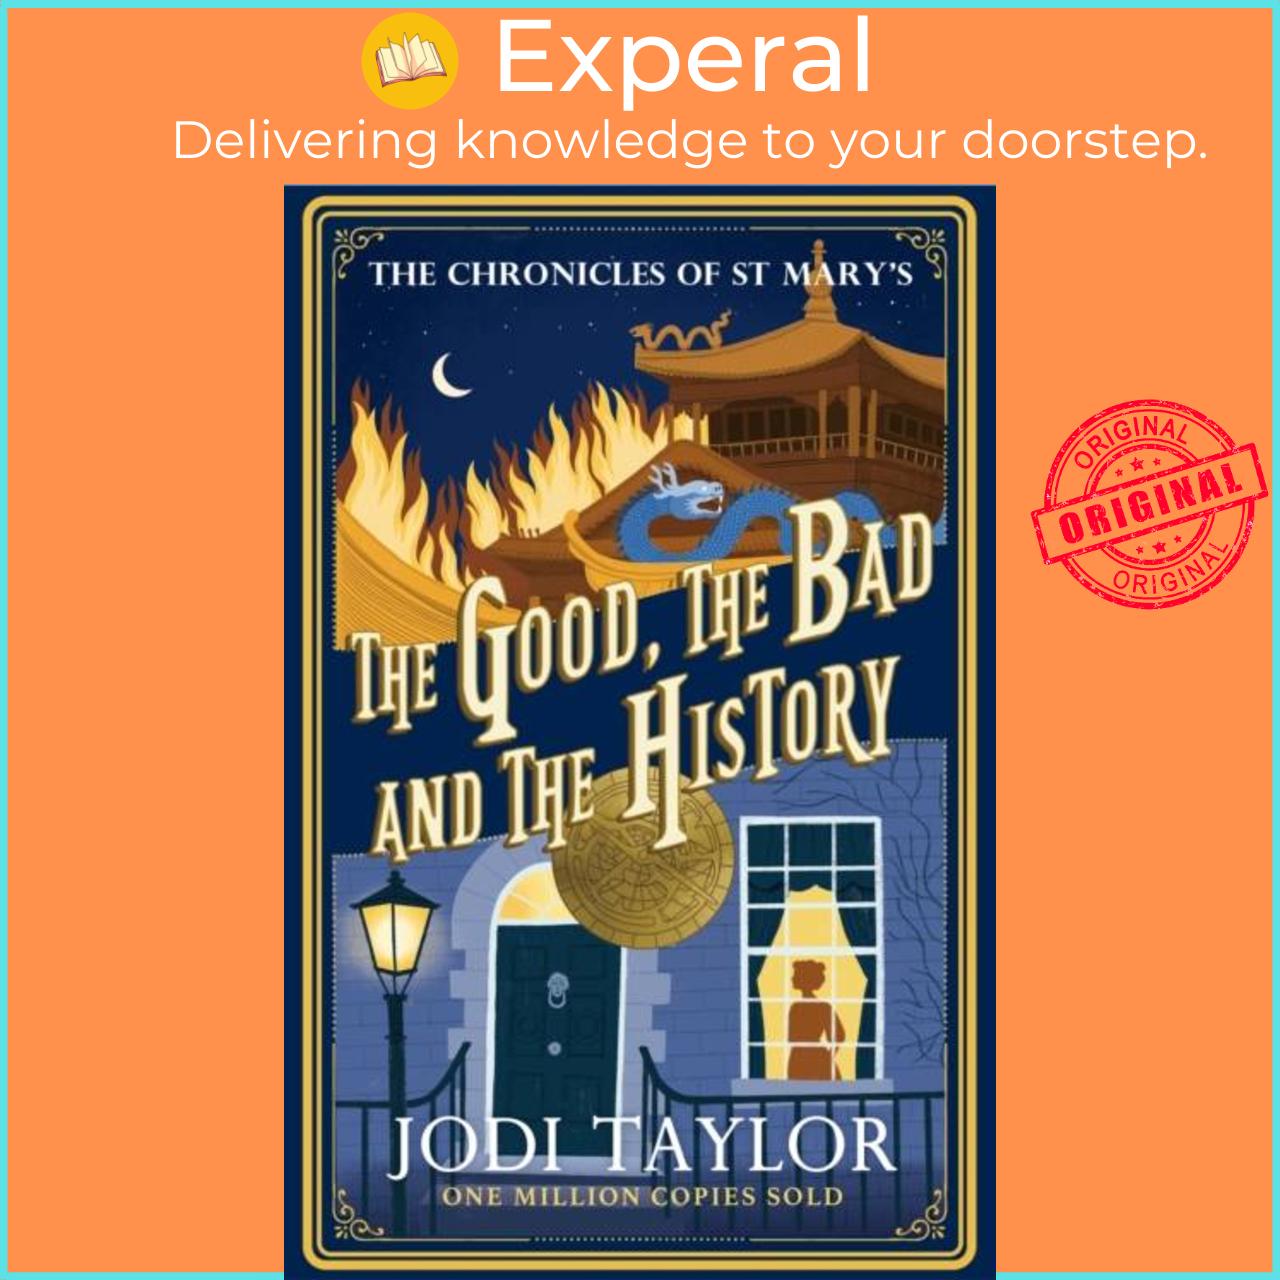 Hình ảnh Sách - The Good, The Bad and The History by Jodi Taylor (UK edition, paperback)